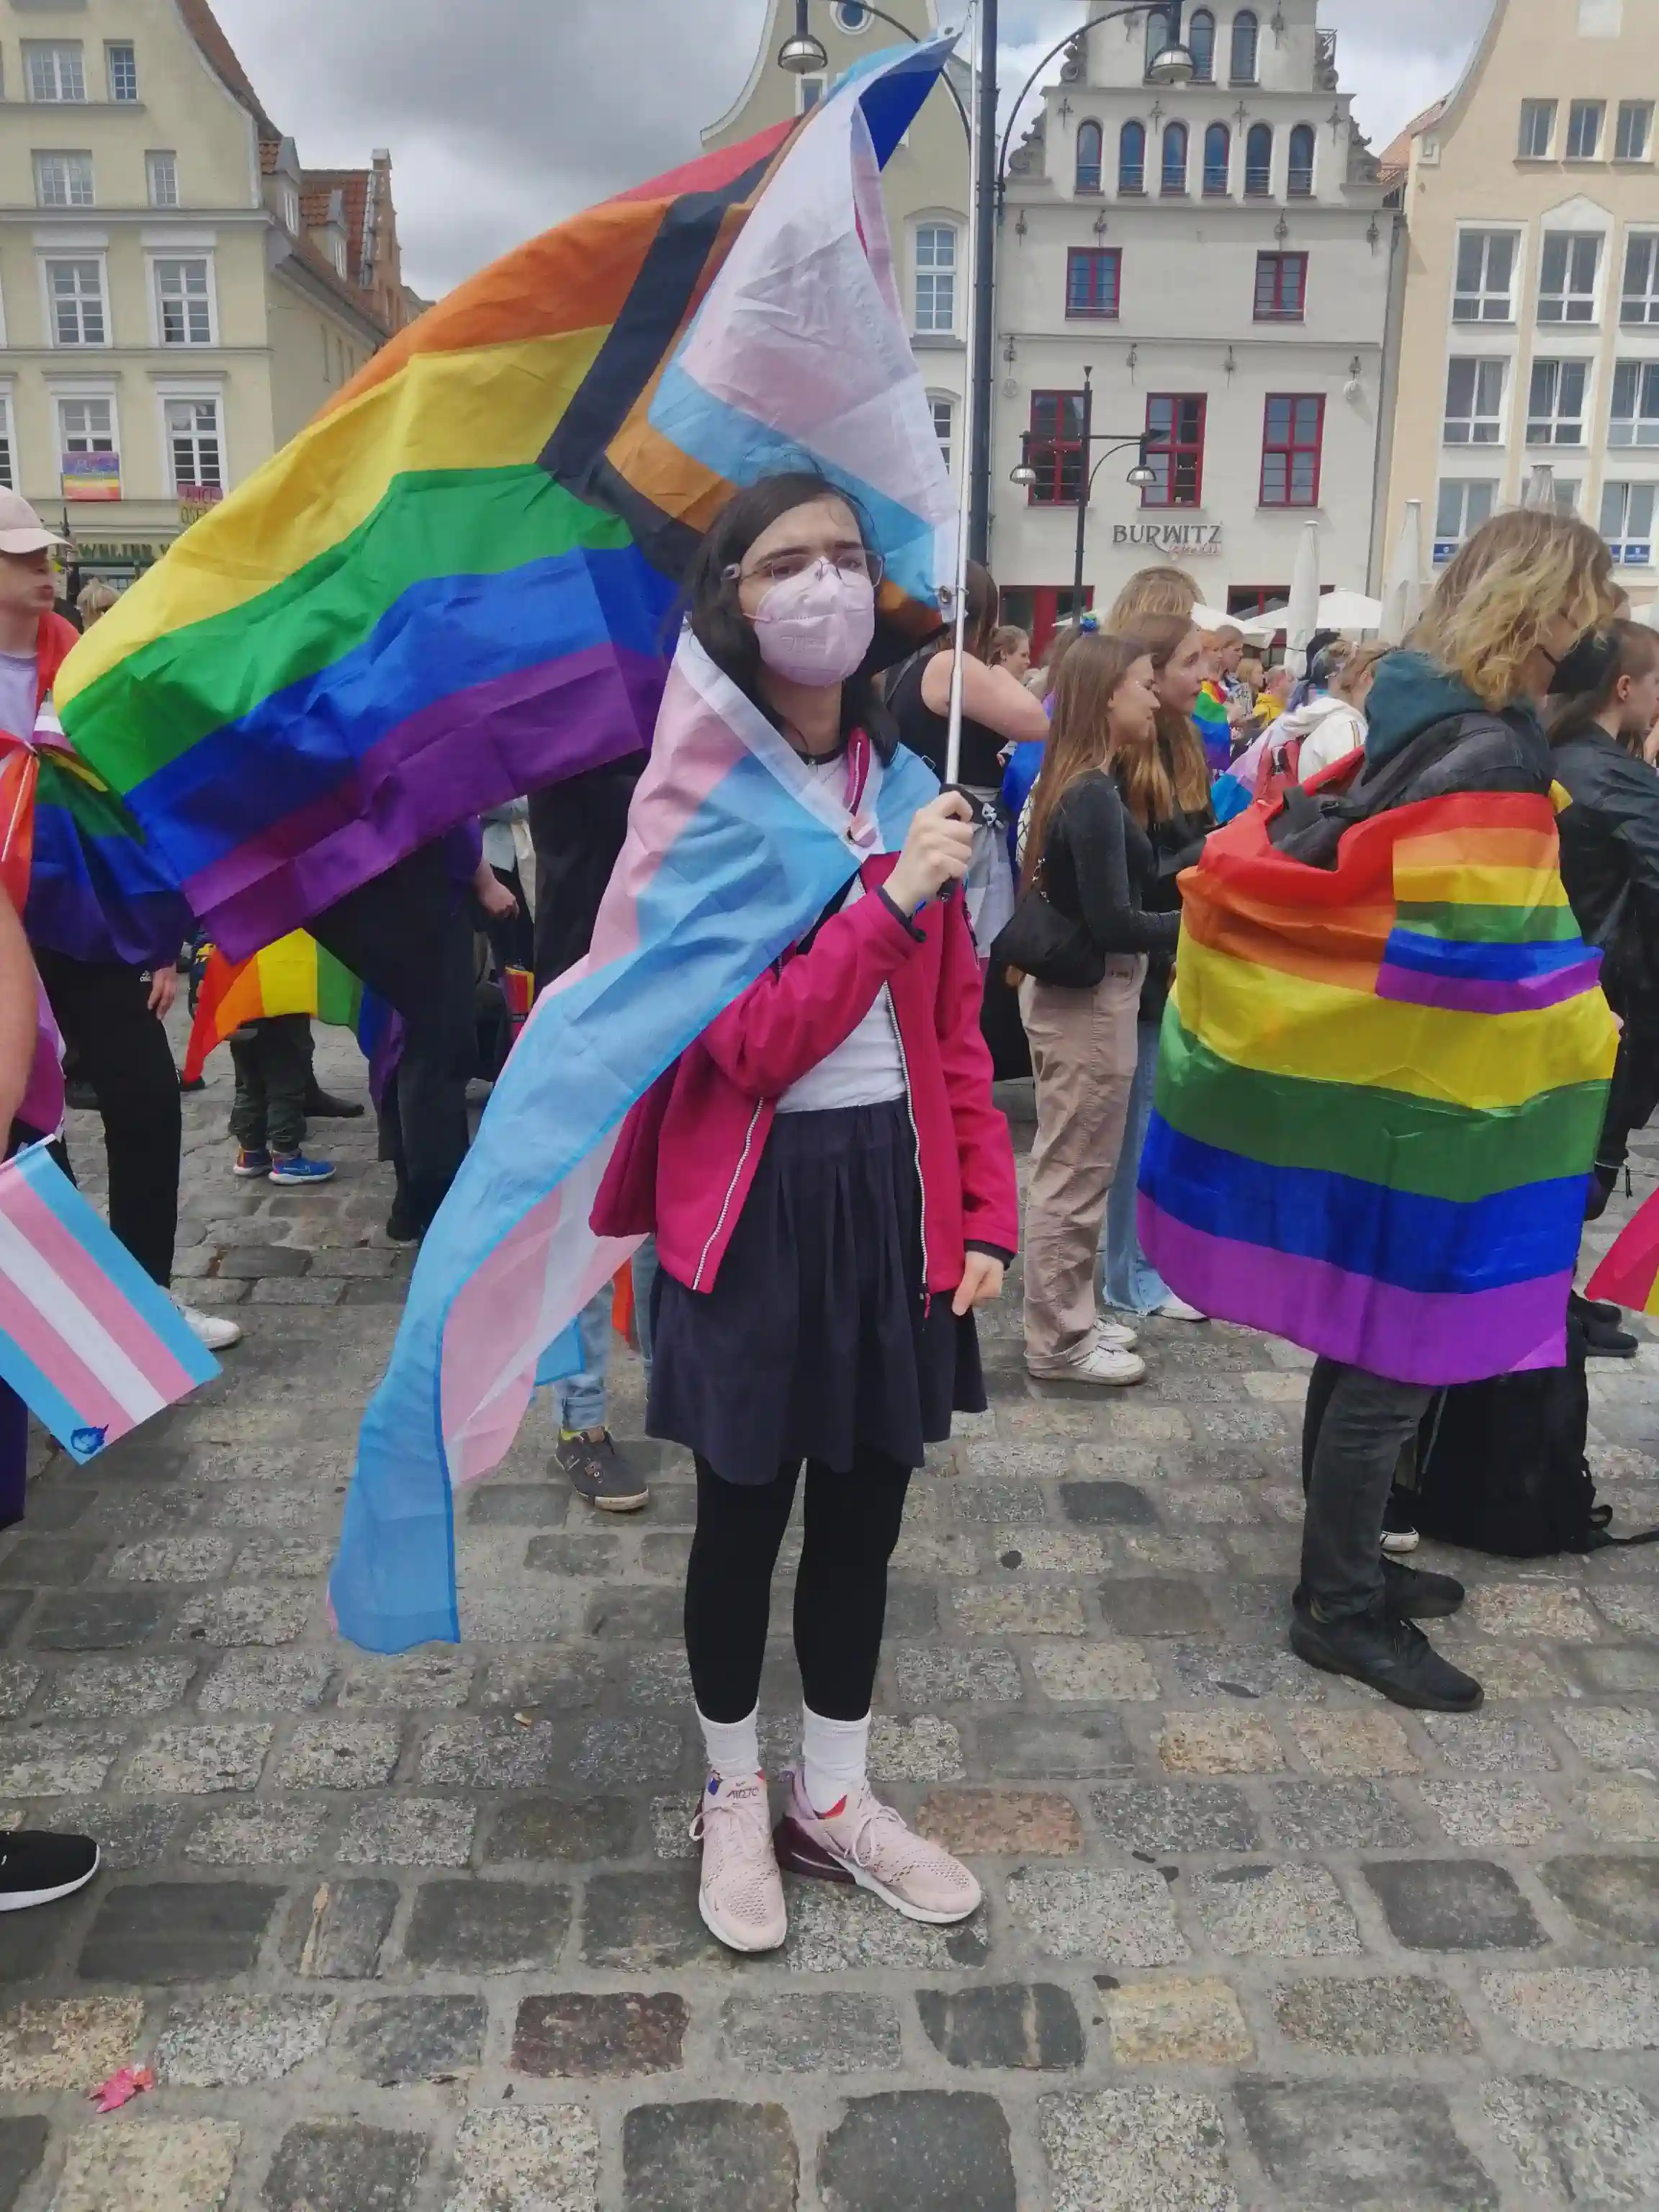 Us, wearing pink jacket, a pink FFP2 mask, and a transgender flag as a cape, held together by a lesbian flag pin, holding a waving progress flag (with a polyamorous flag on the other side, not visible in the picture)